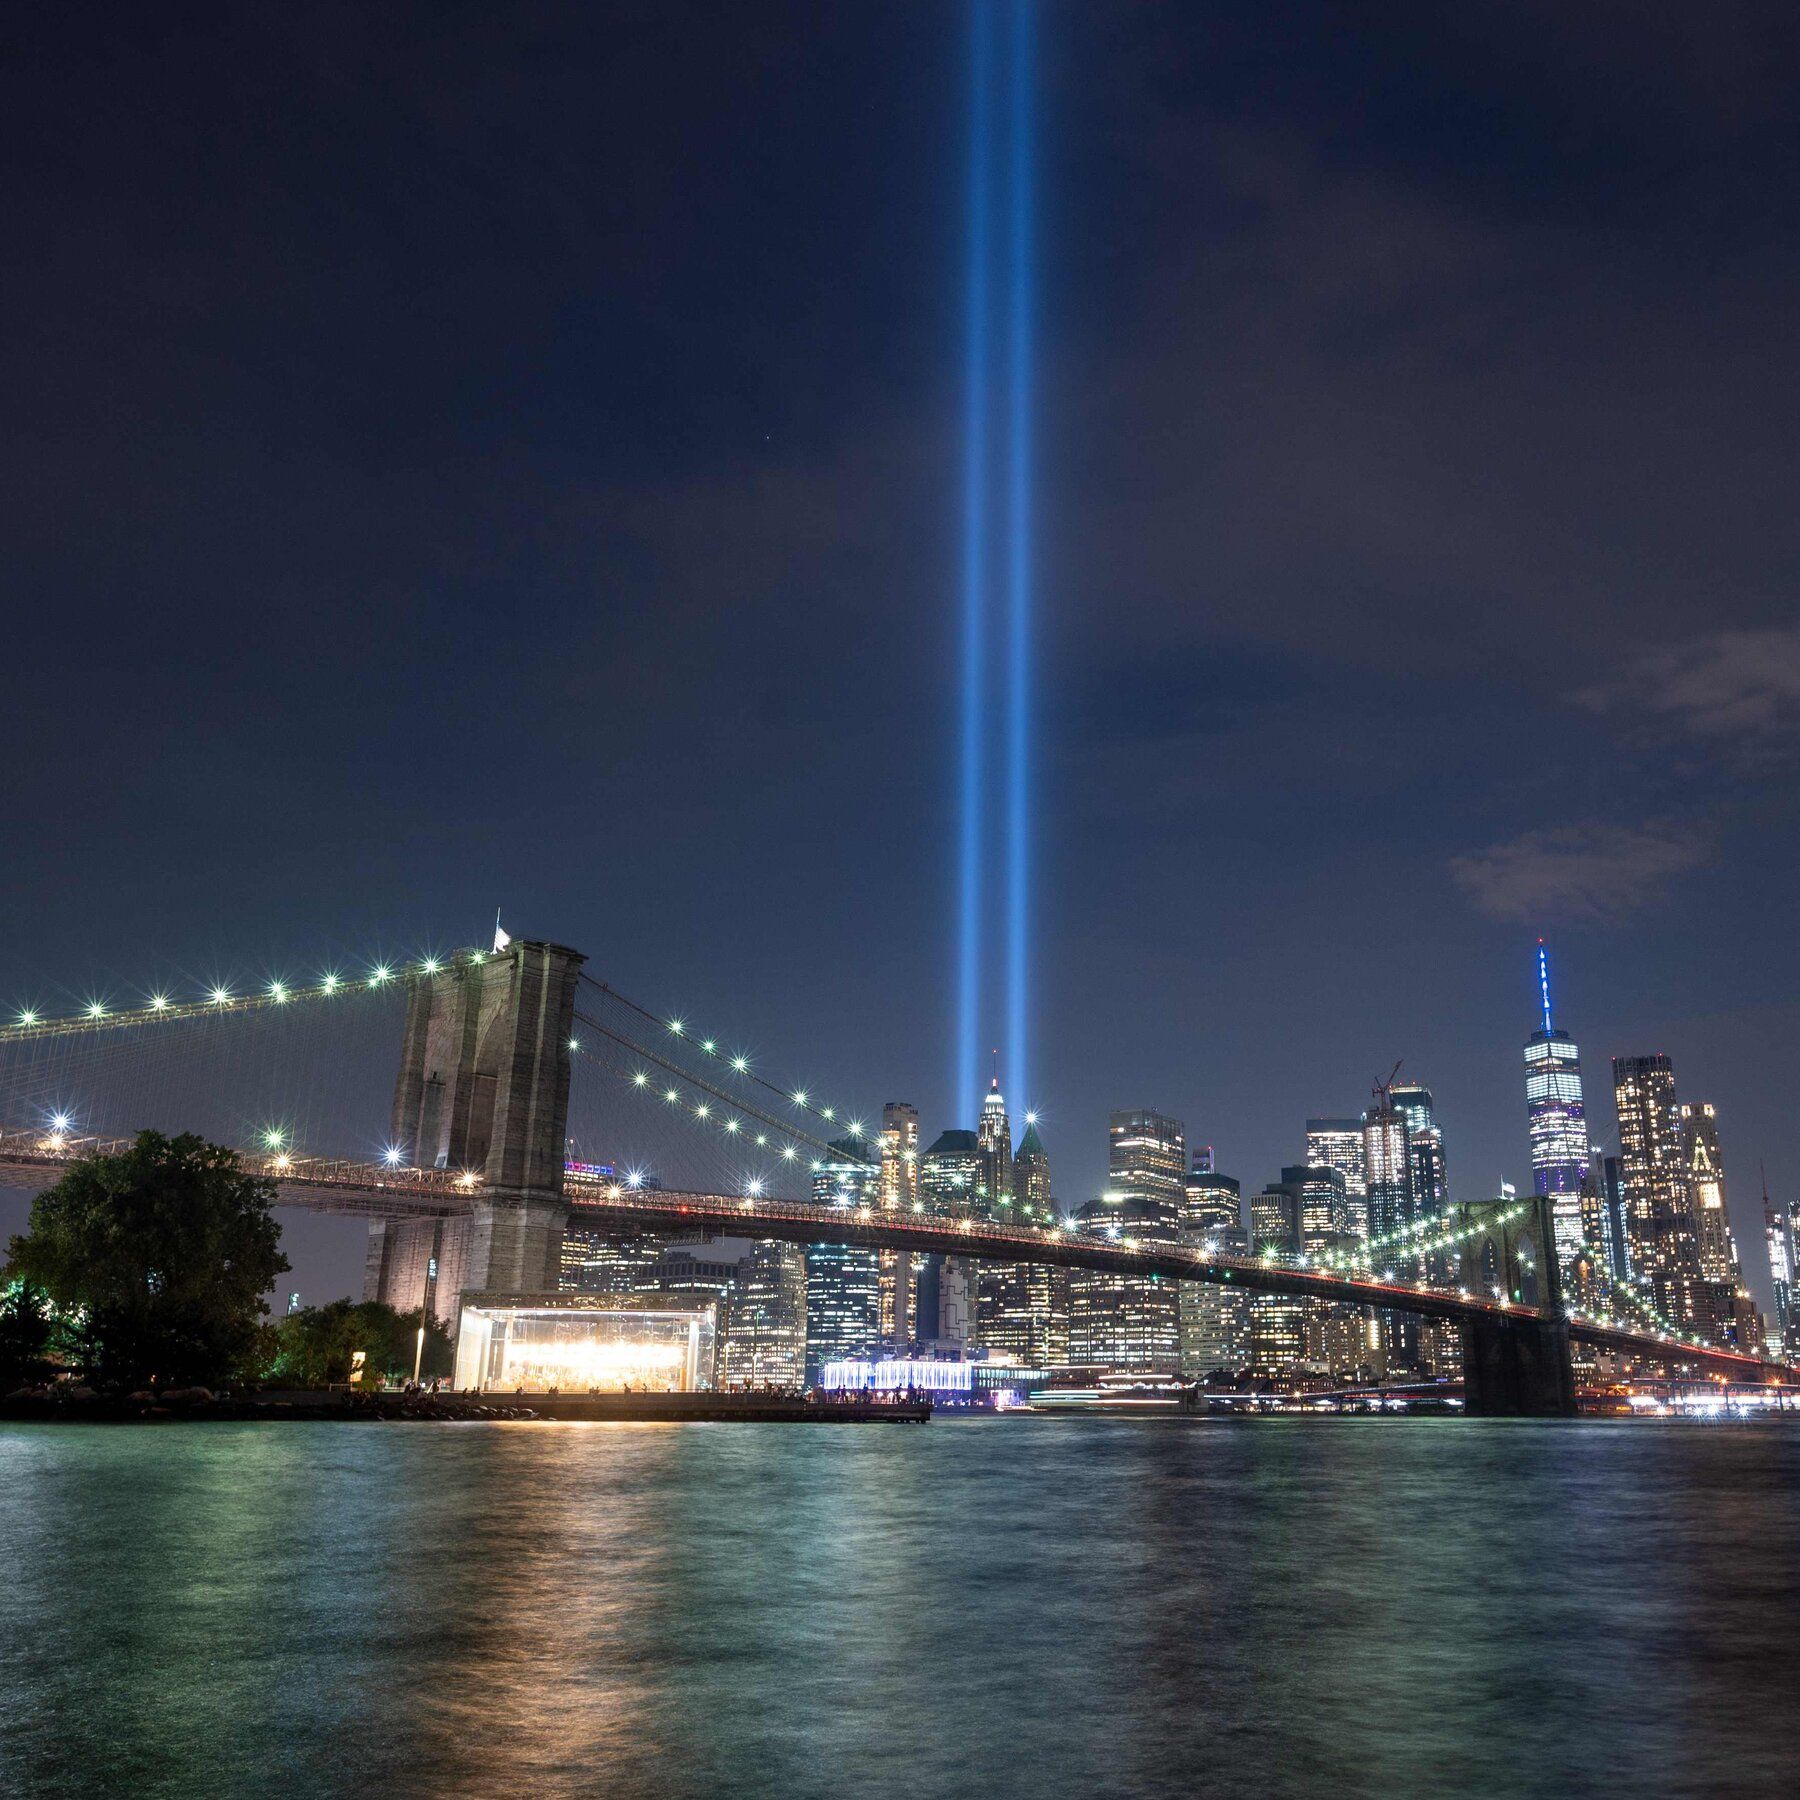 11 Tribute Lights Won't Be Projected Into Sky This Year